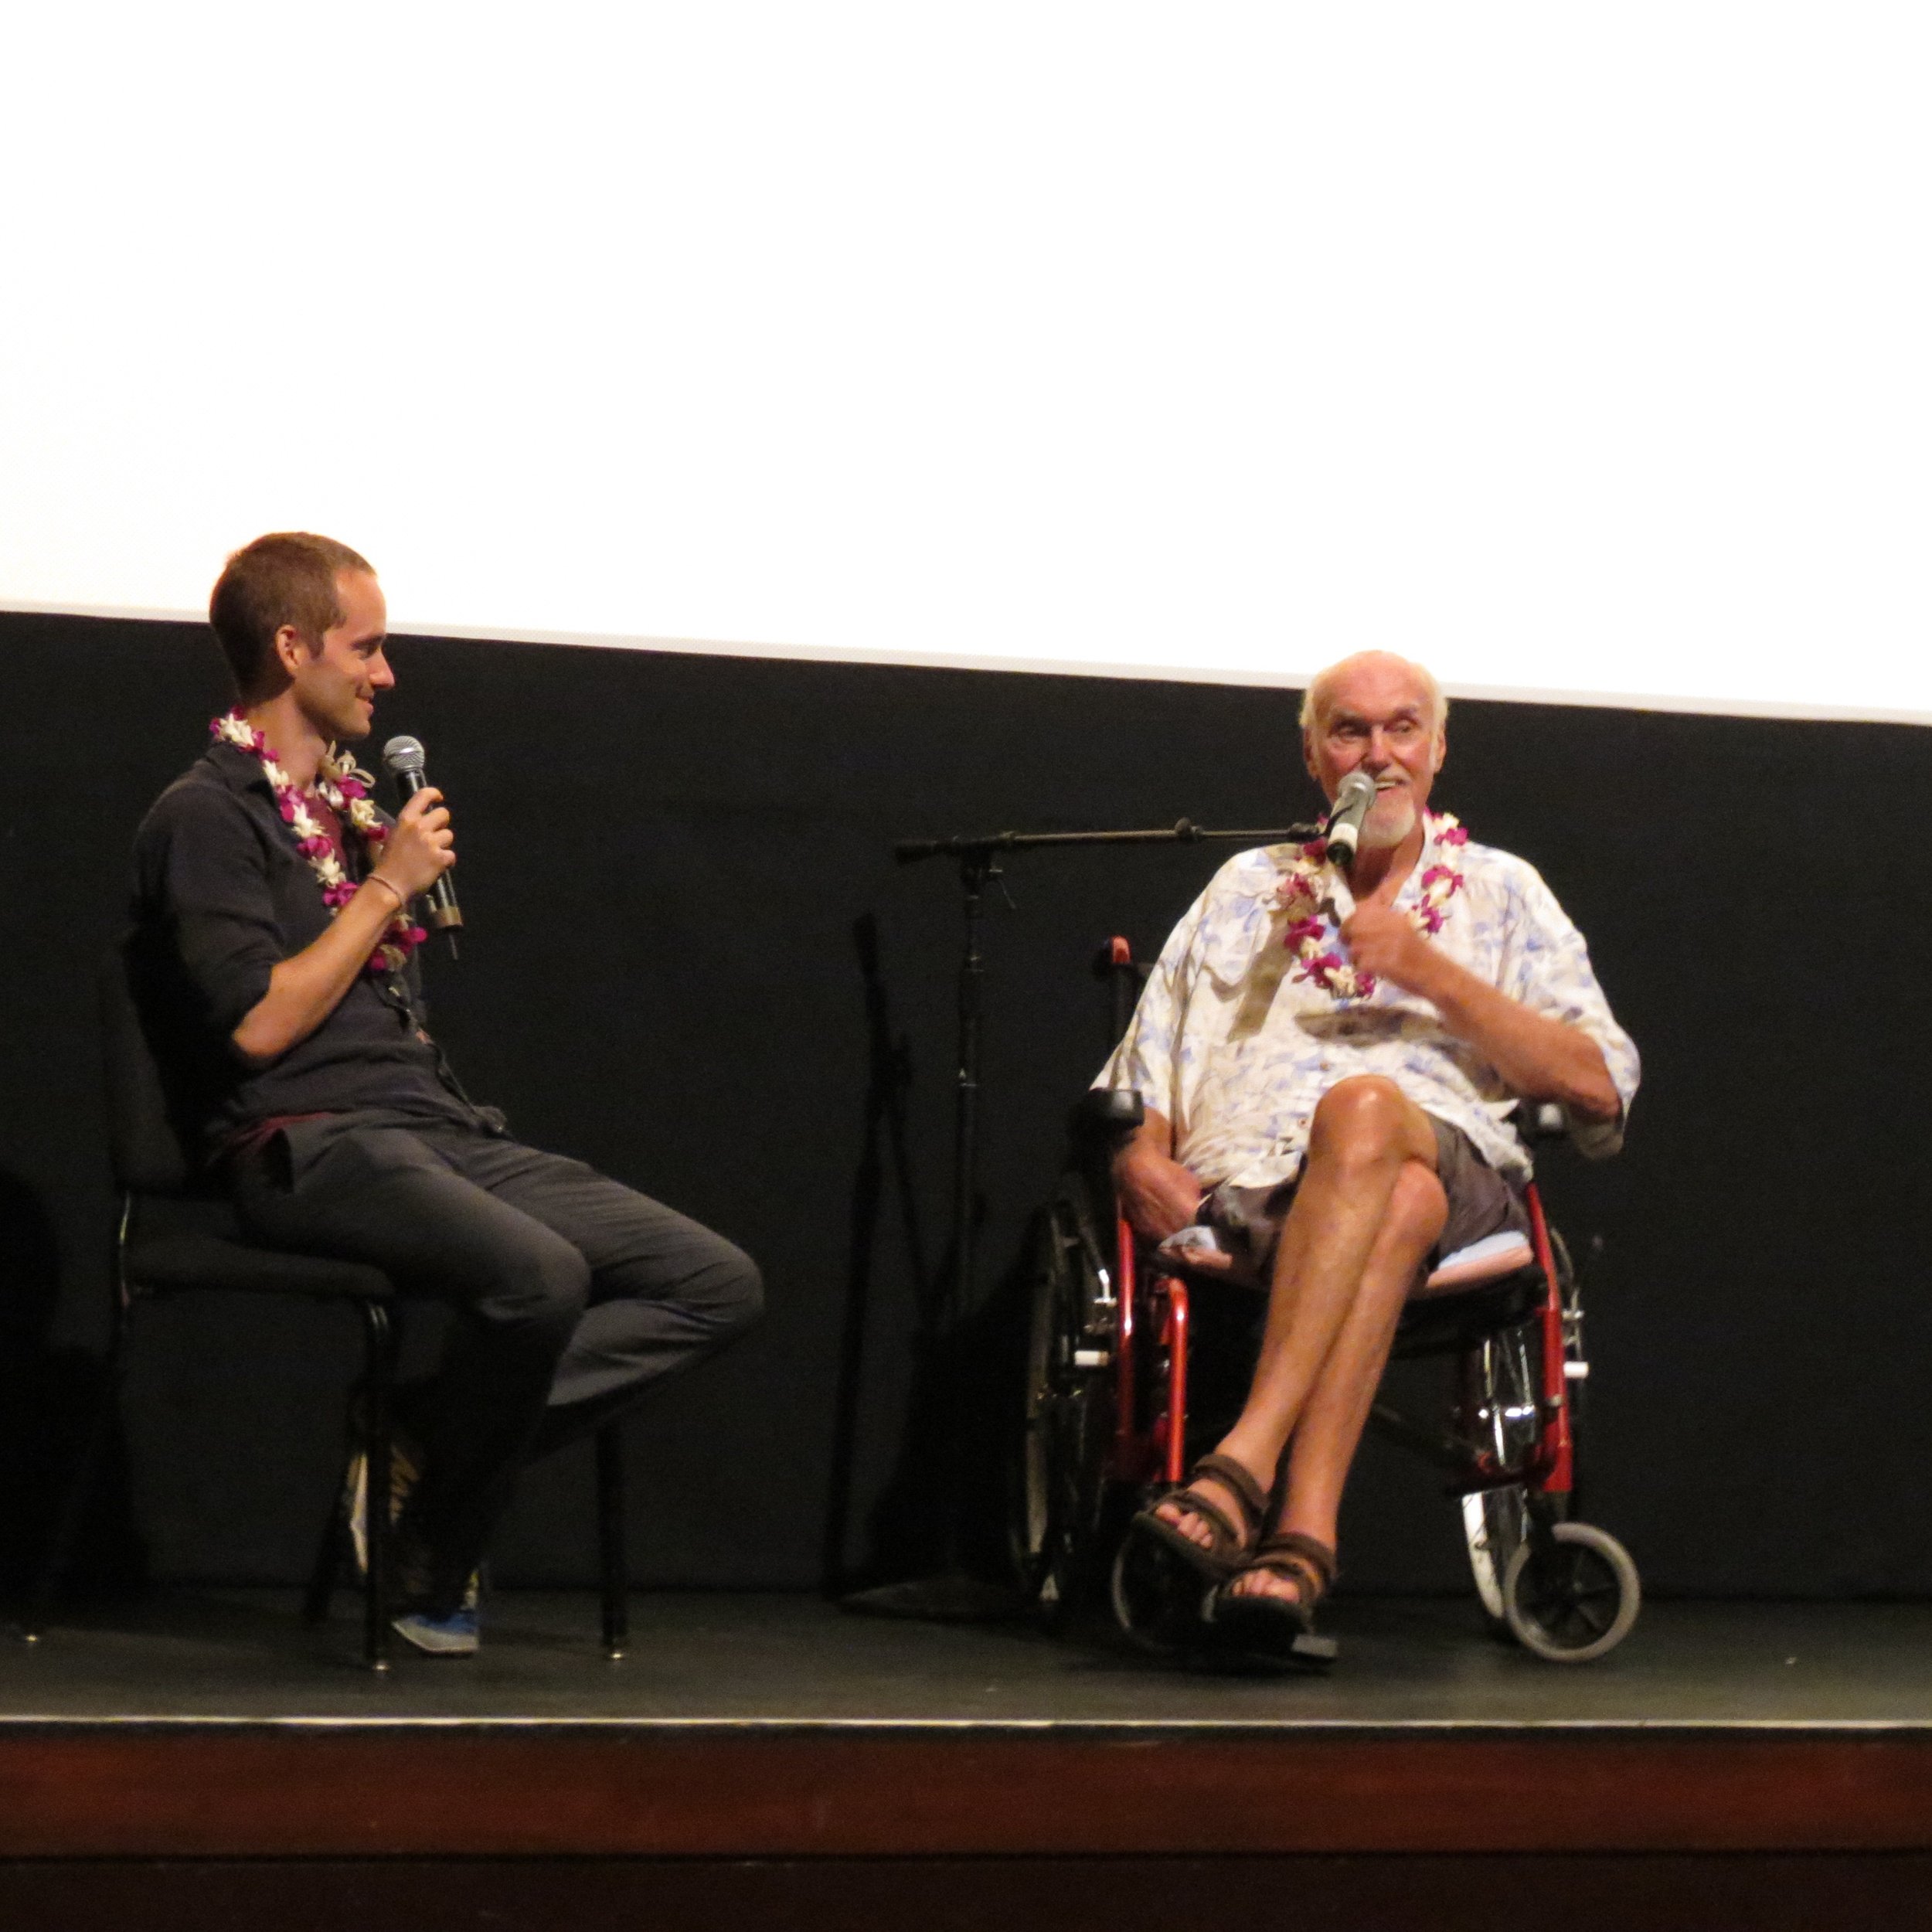  Q&amp;A at the Maui Film Festival with Ram Dass and Jeremy Frindel 